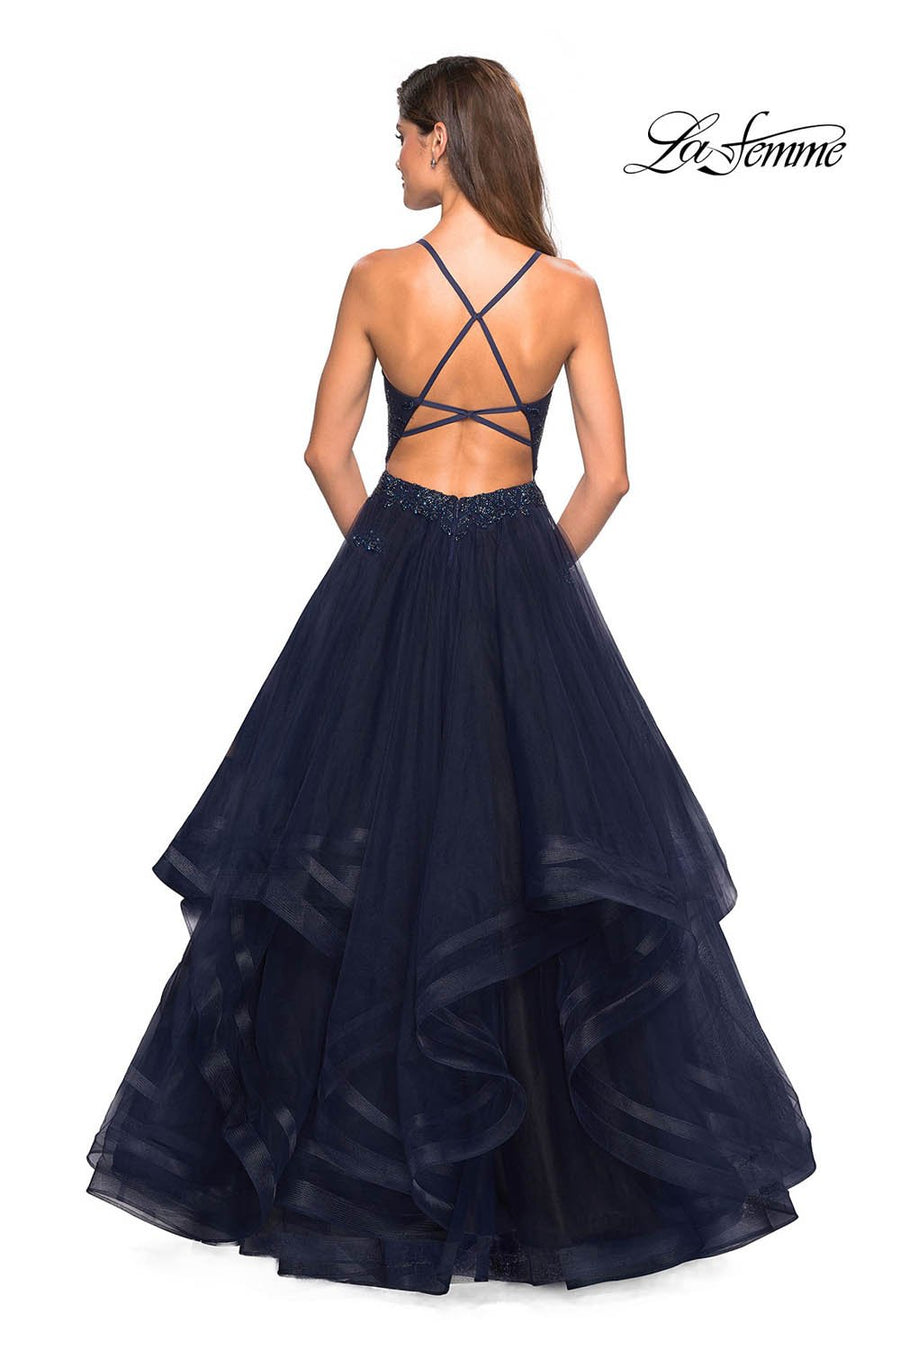 La Femme 27192 prom dress images.  La Femme 27192 is available in these colors: Navy.